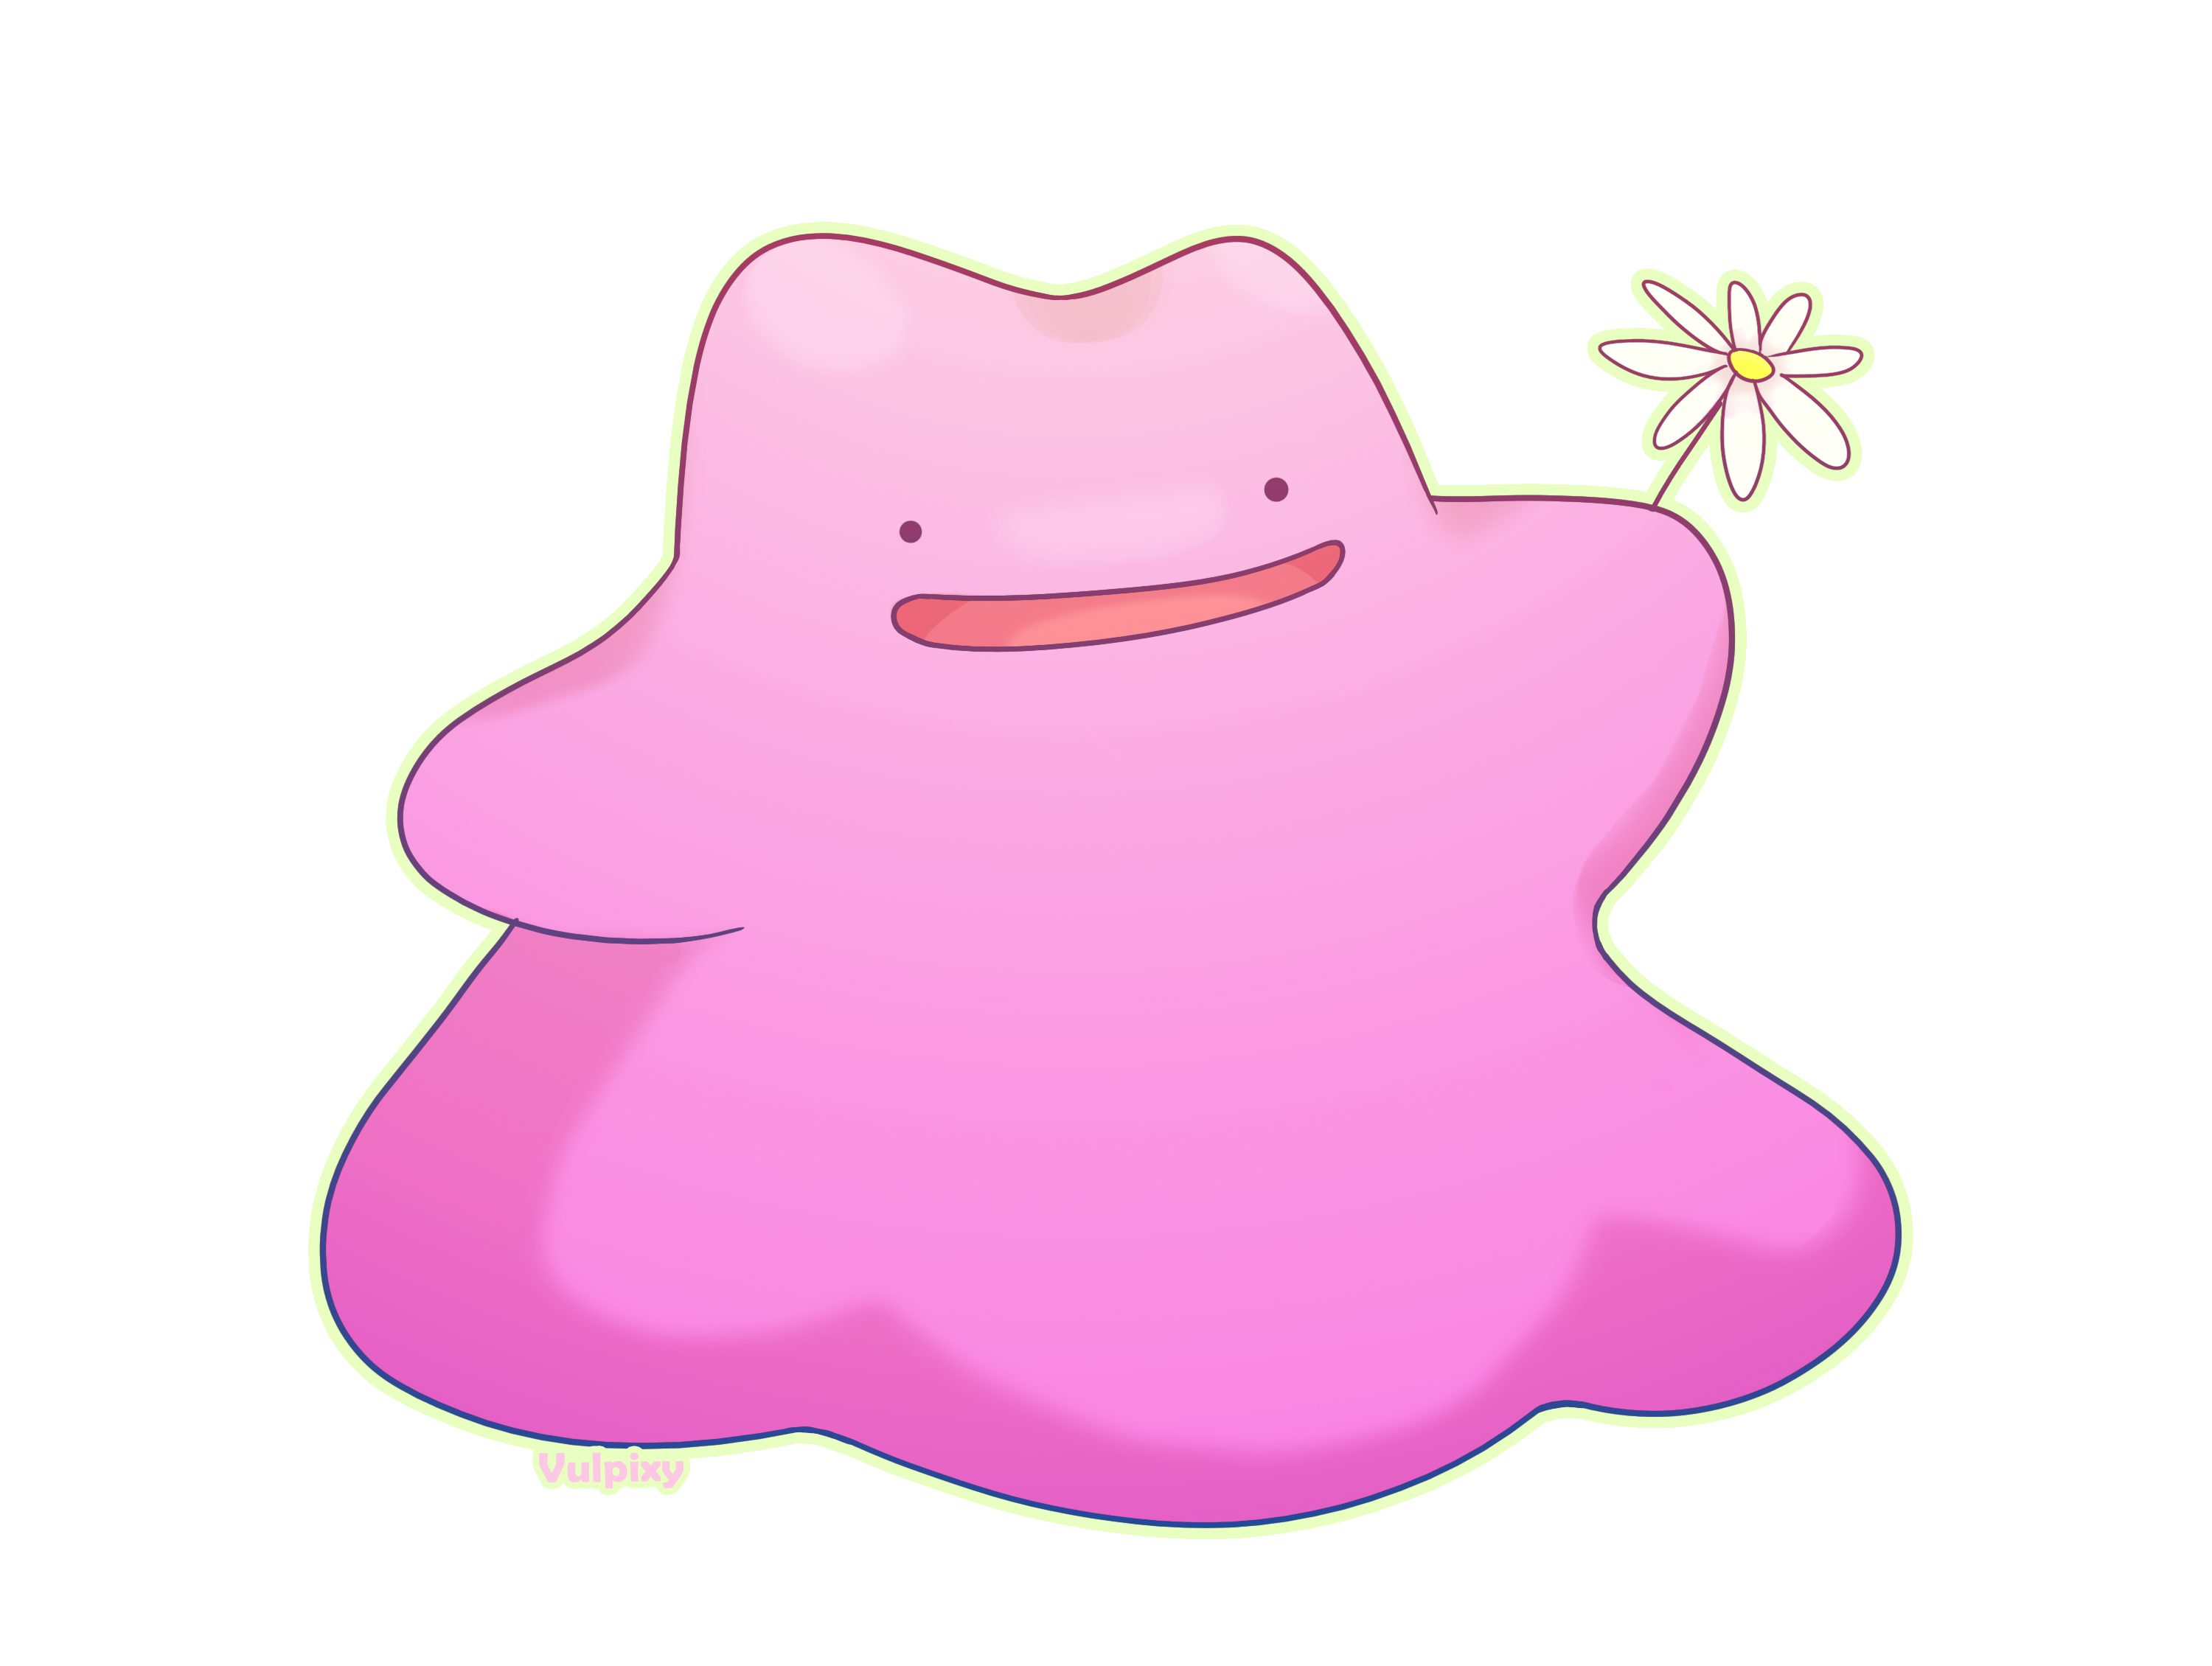 Ditto PNG Clipart